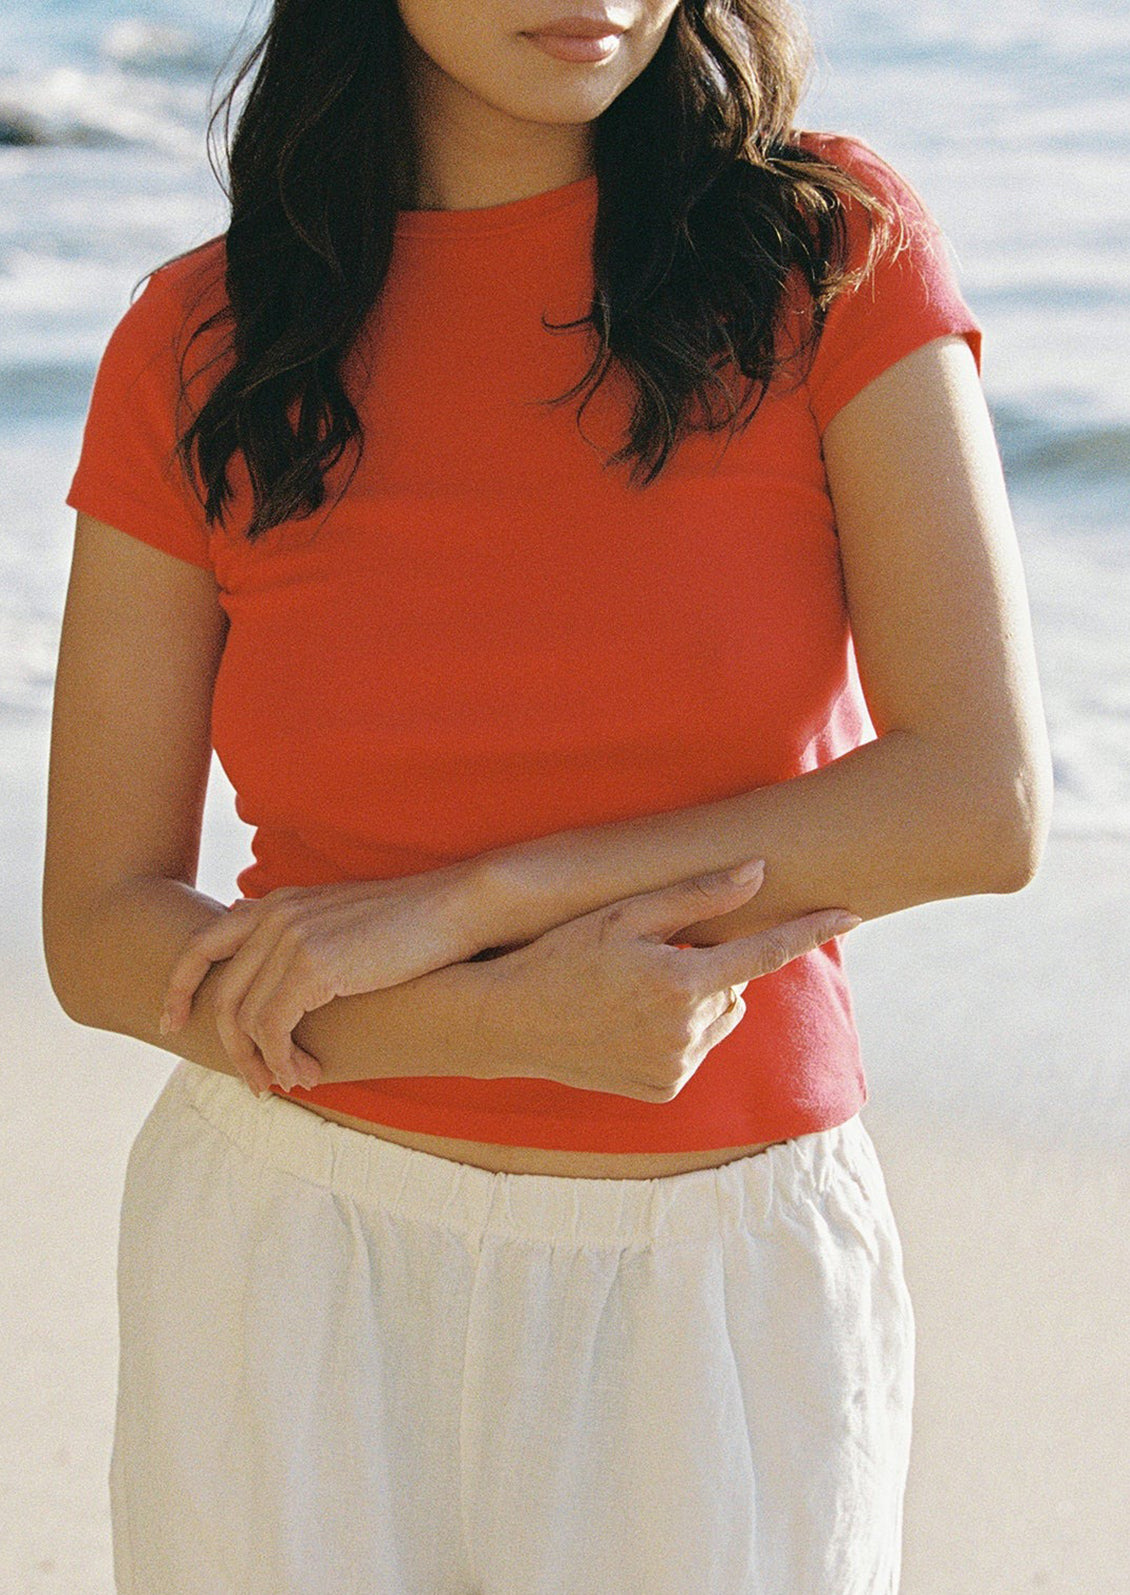 A woman wearing a red short sleeve tee.